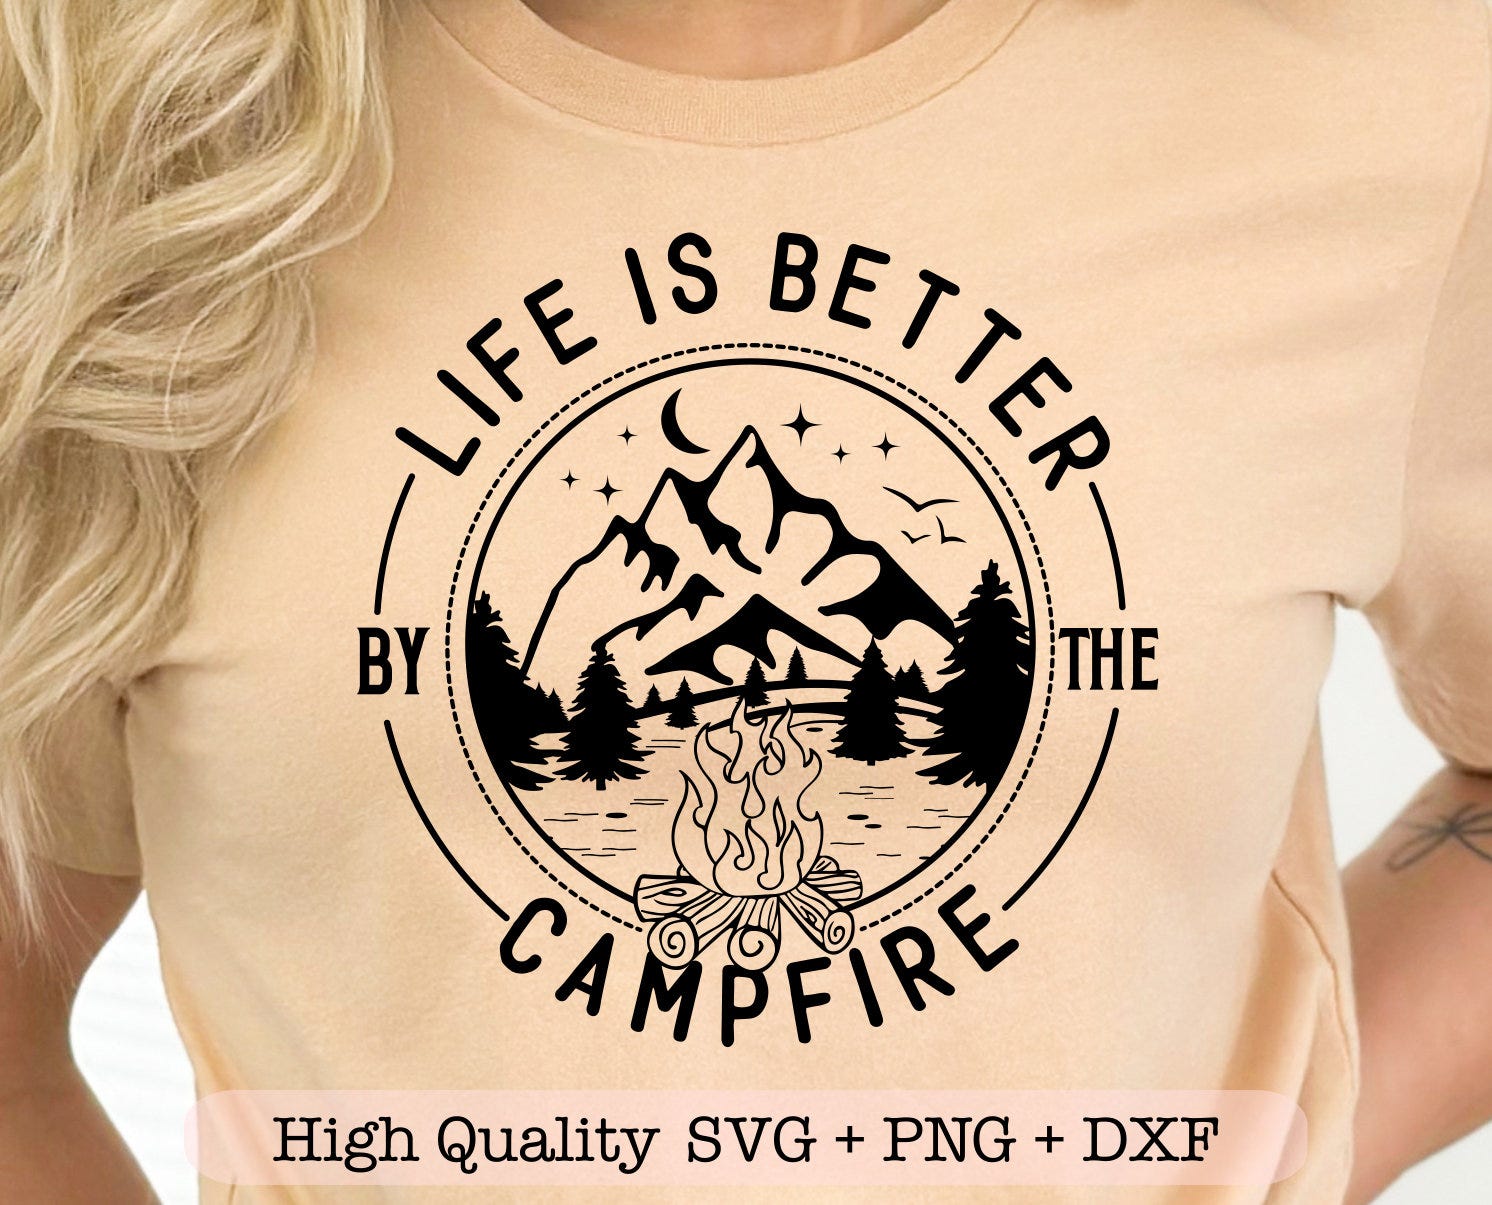 Life Is Better By The Campfire SVG, Camping shirt svg, Camp life svg, Campfire svg, Camping quote svg